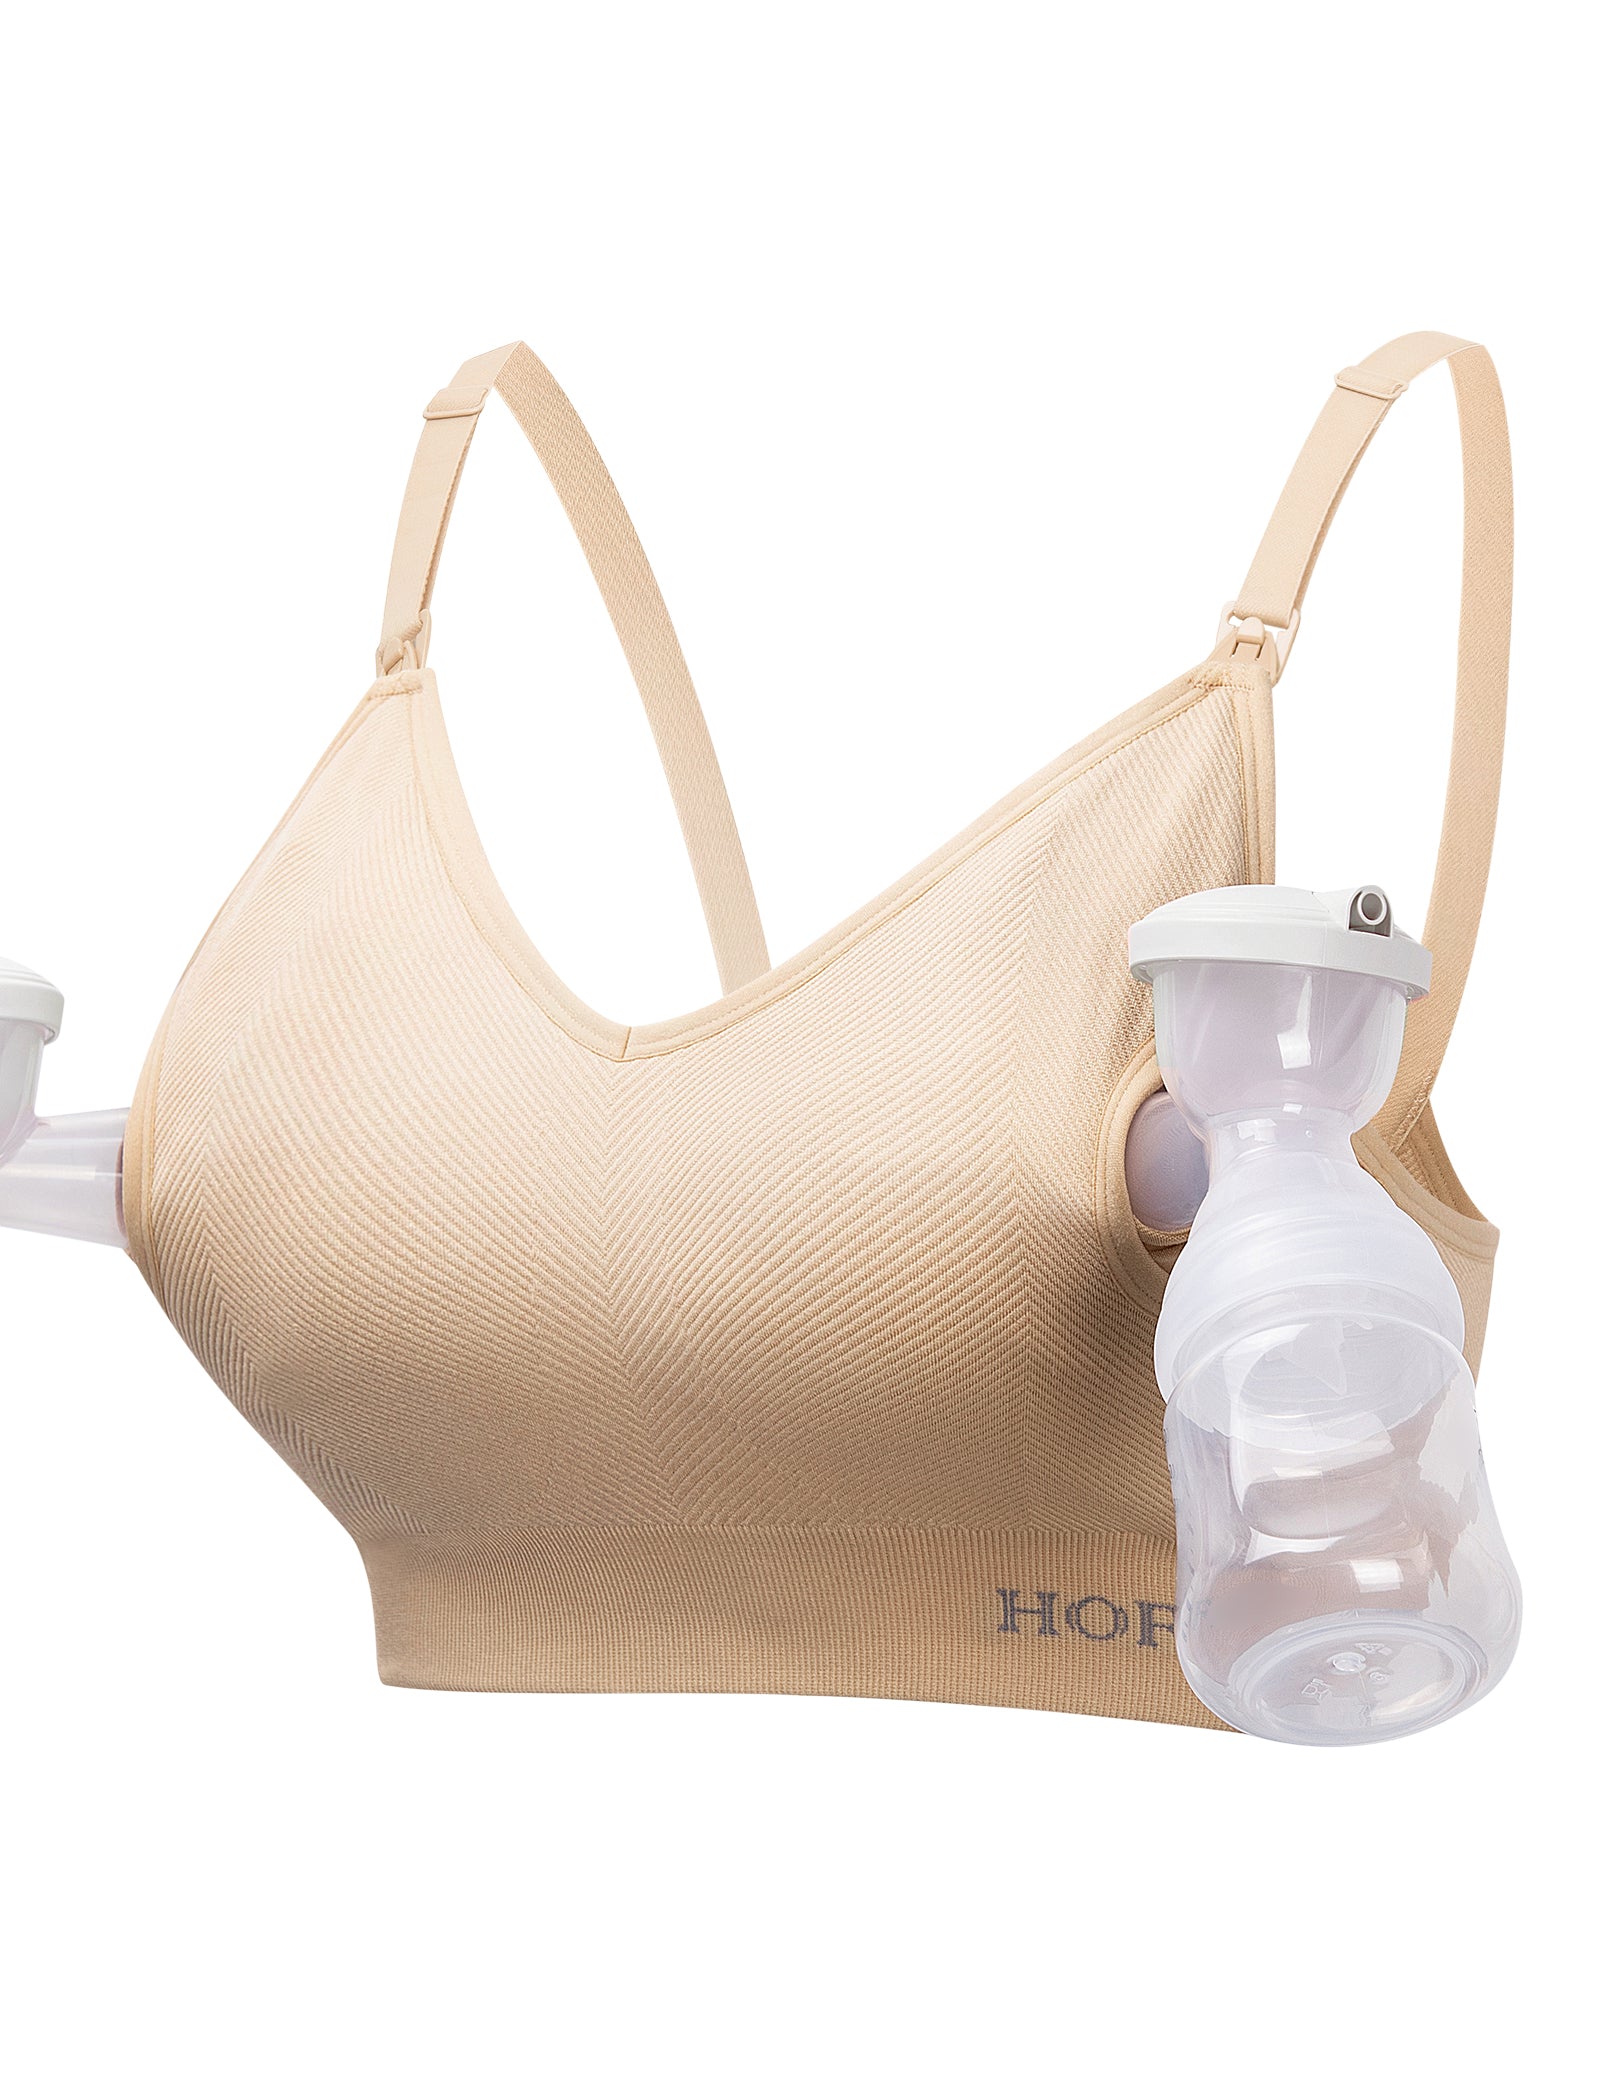 HOFISH Women's Seamless All-in-One Hands Free Pumping Bra Supportive M